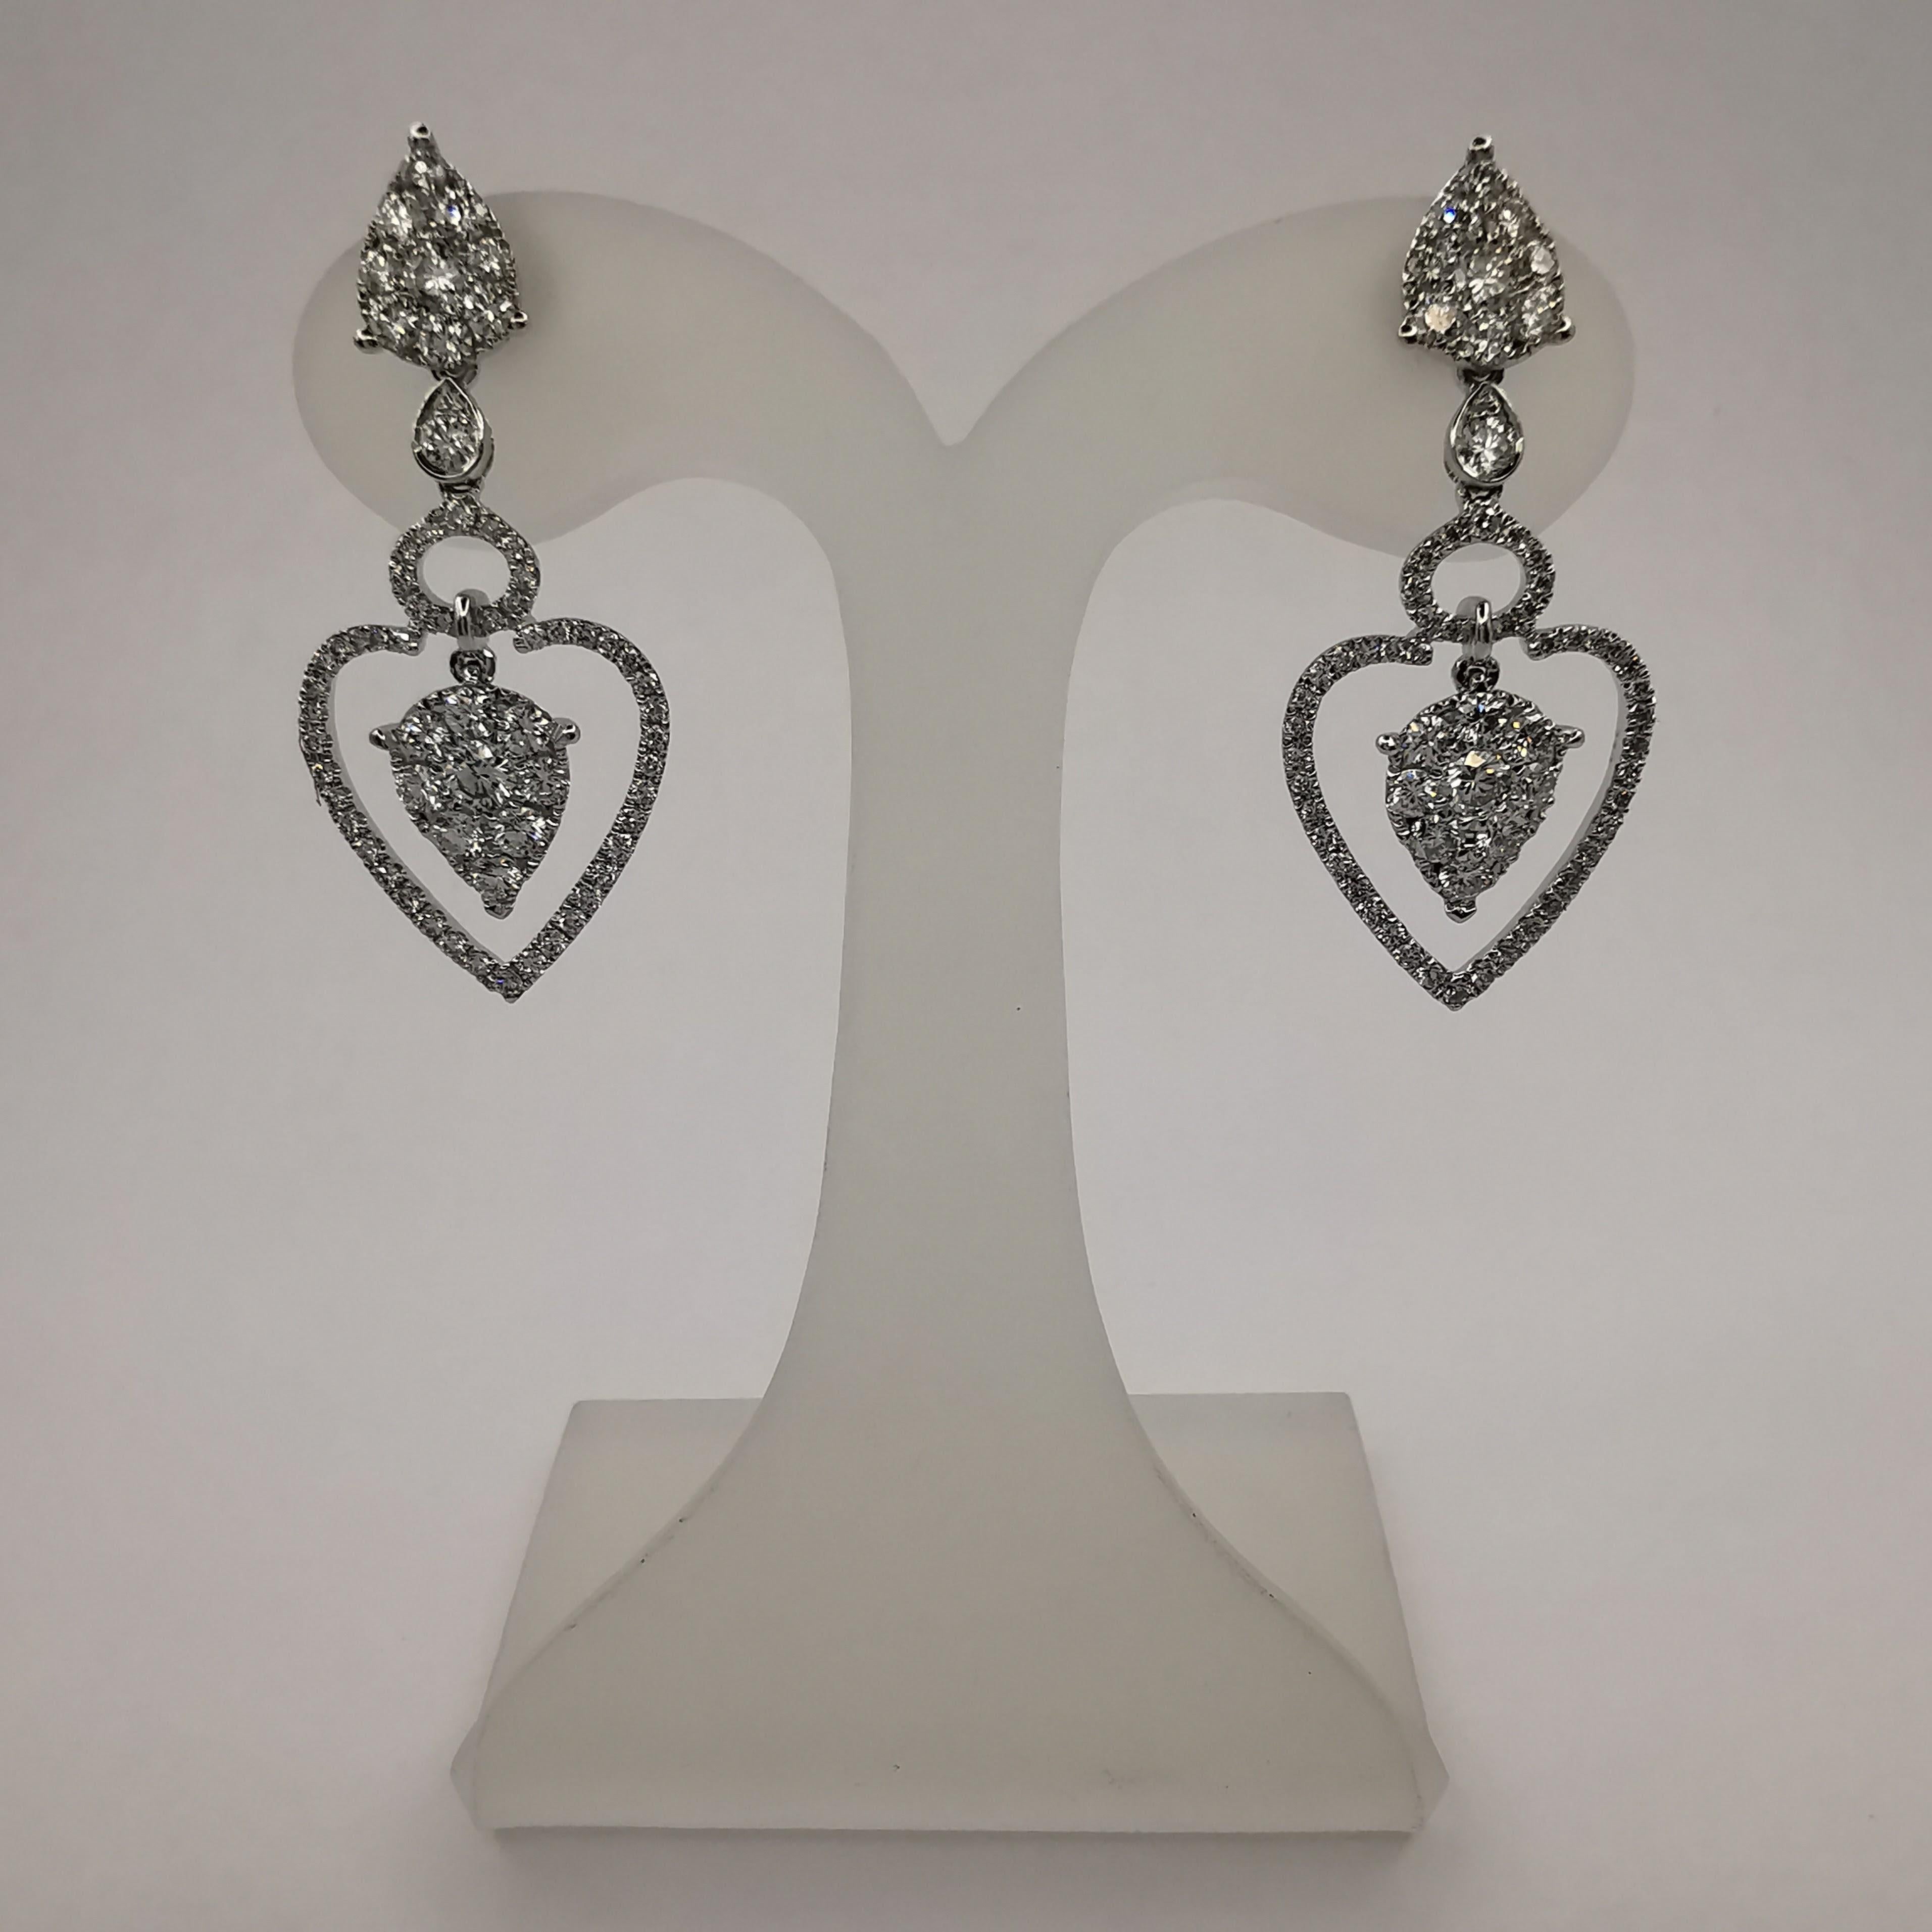 These stunning triple teardrop diamond dangling earrings are a true masterpiece of fine jewelry. Crafted in 18K white gold, each earring features a dangling inverted pear/teardrop-shaped diamond cluster within a halo, held by an upper dangle and a